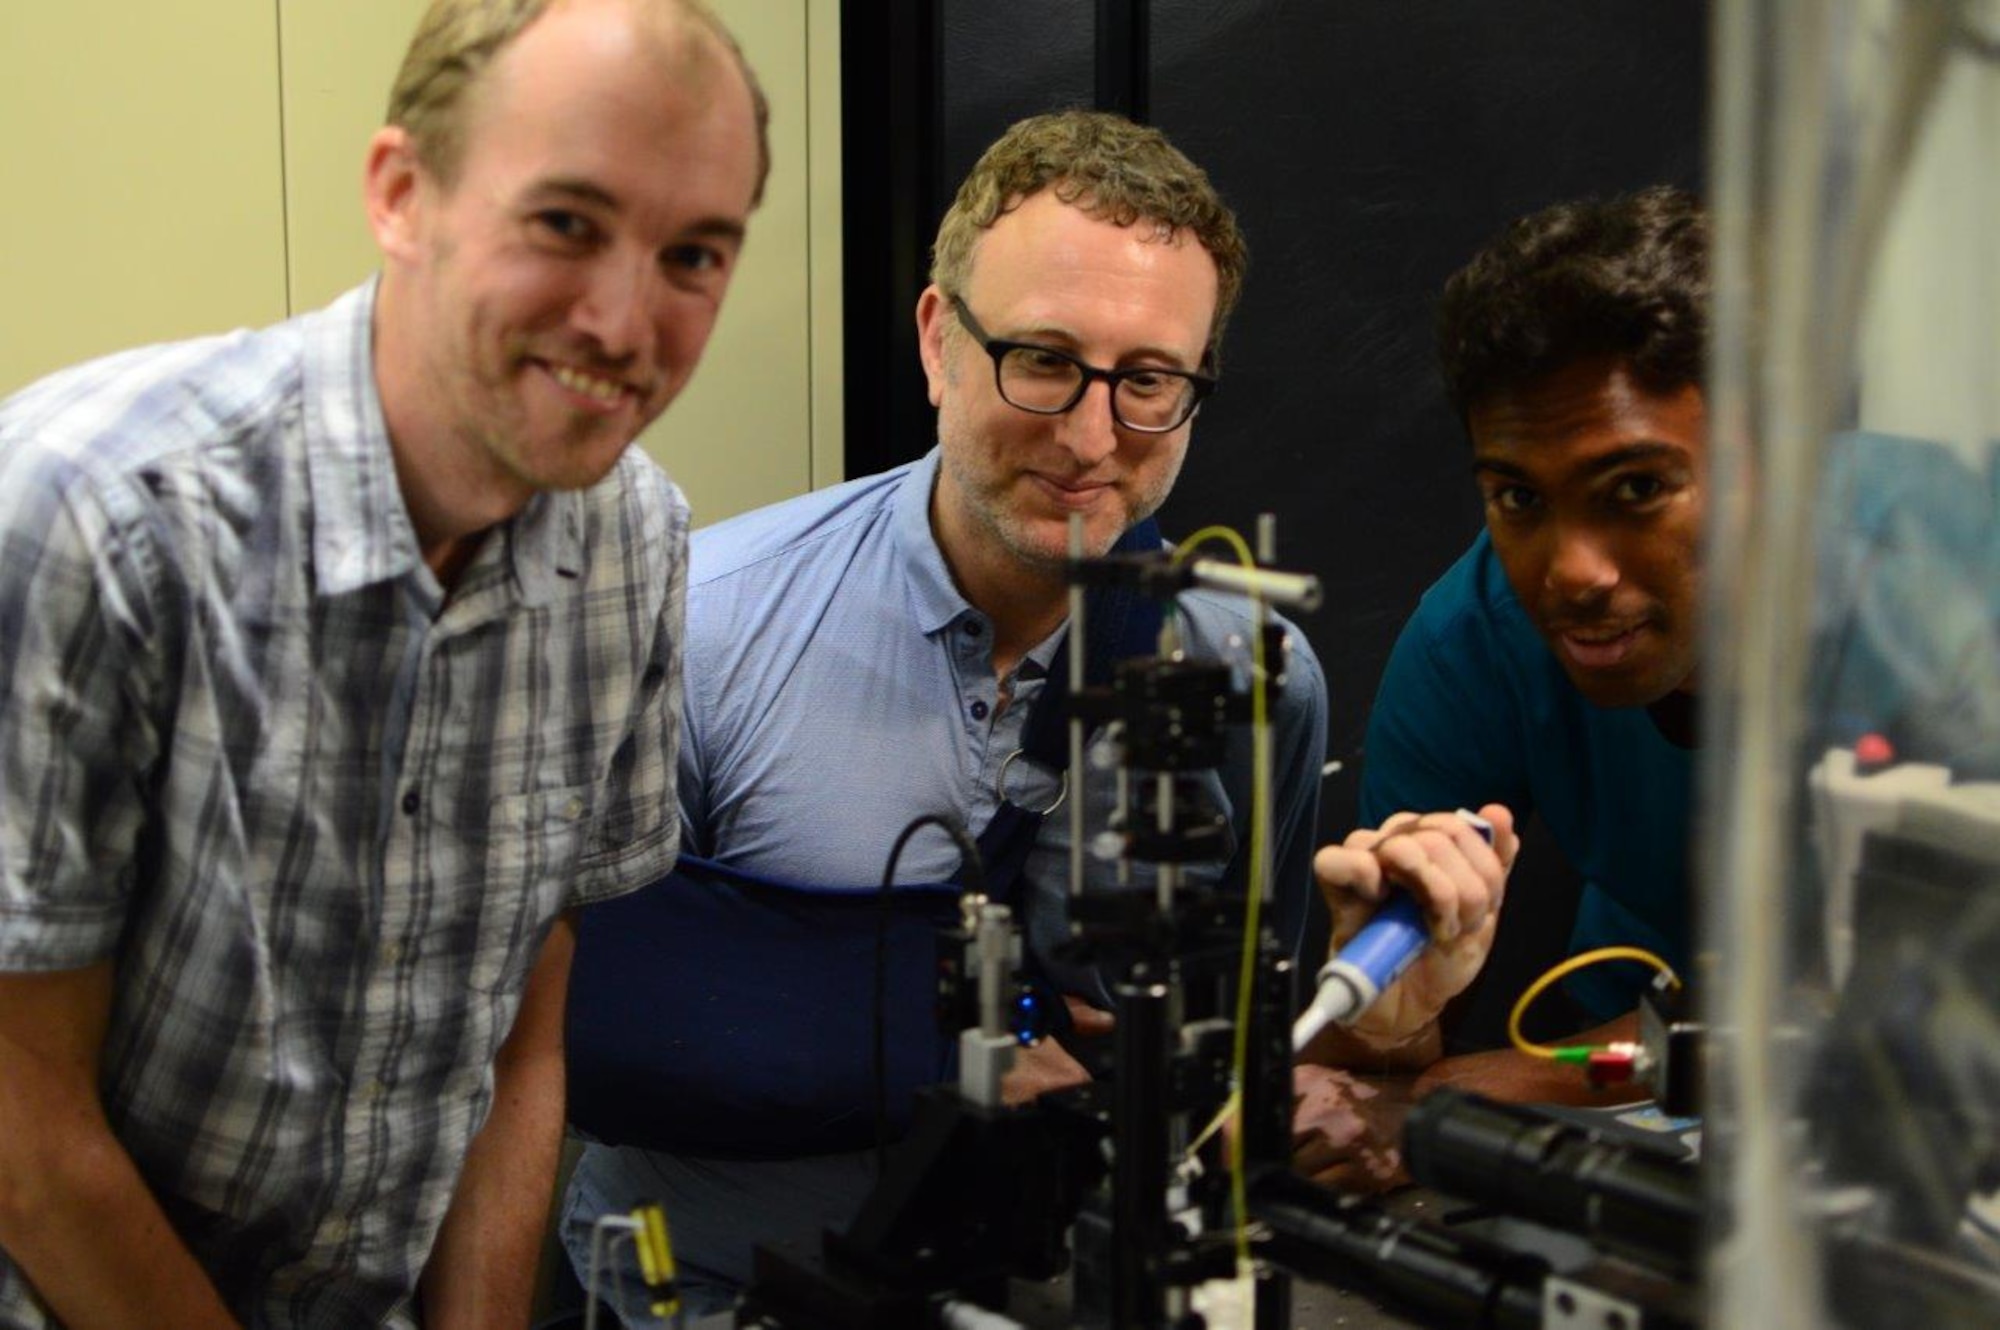 Researchers Lars Madsen, Warwick Bowen, and Nicholas Mauranyapin perform quantum optics experiments at the Laboratory for Translational Quantum Science, in the Australian Centre for Engineered Quantum Systems, University of Queensland on November 30, 2016. The experiments are being performed broadly to bring to bear techniques from quantum optics on the biological sciences and microscopy, with the goal of enhancing the resolution and speed of biological imaging and sensing. (Courtesy photo / Erick Romero)